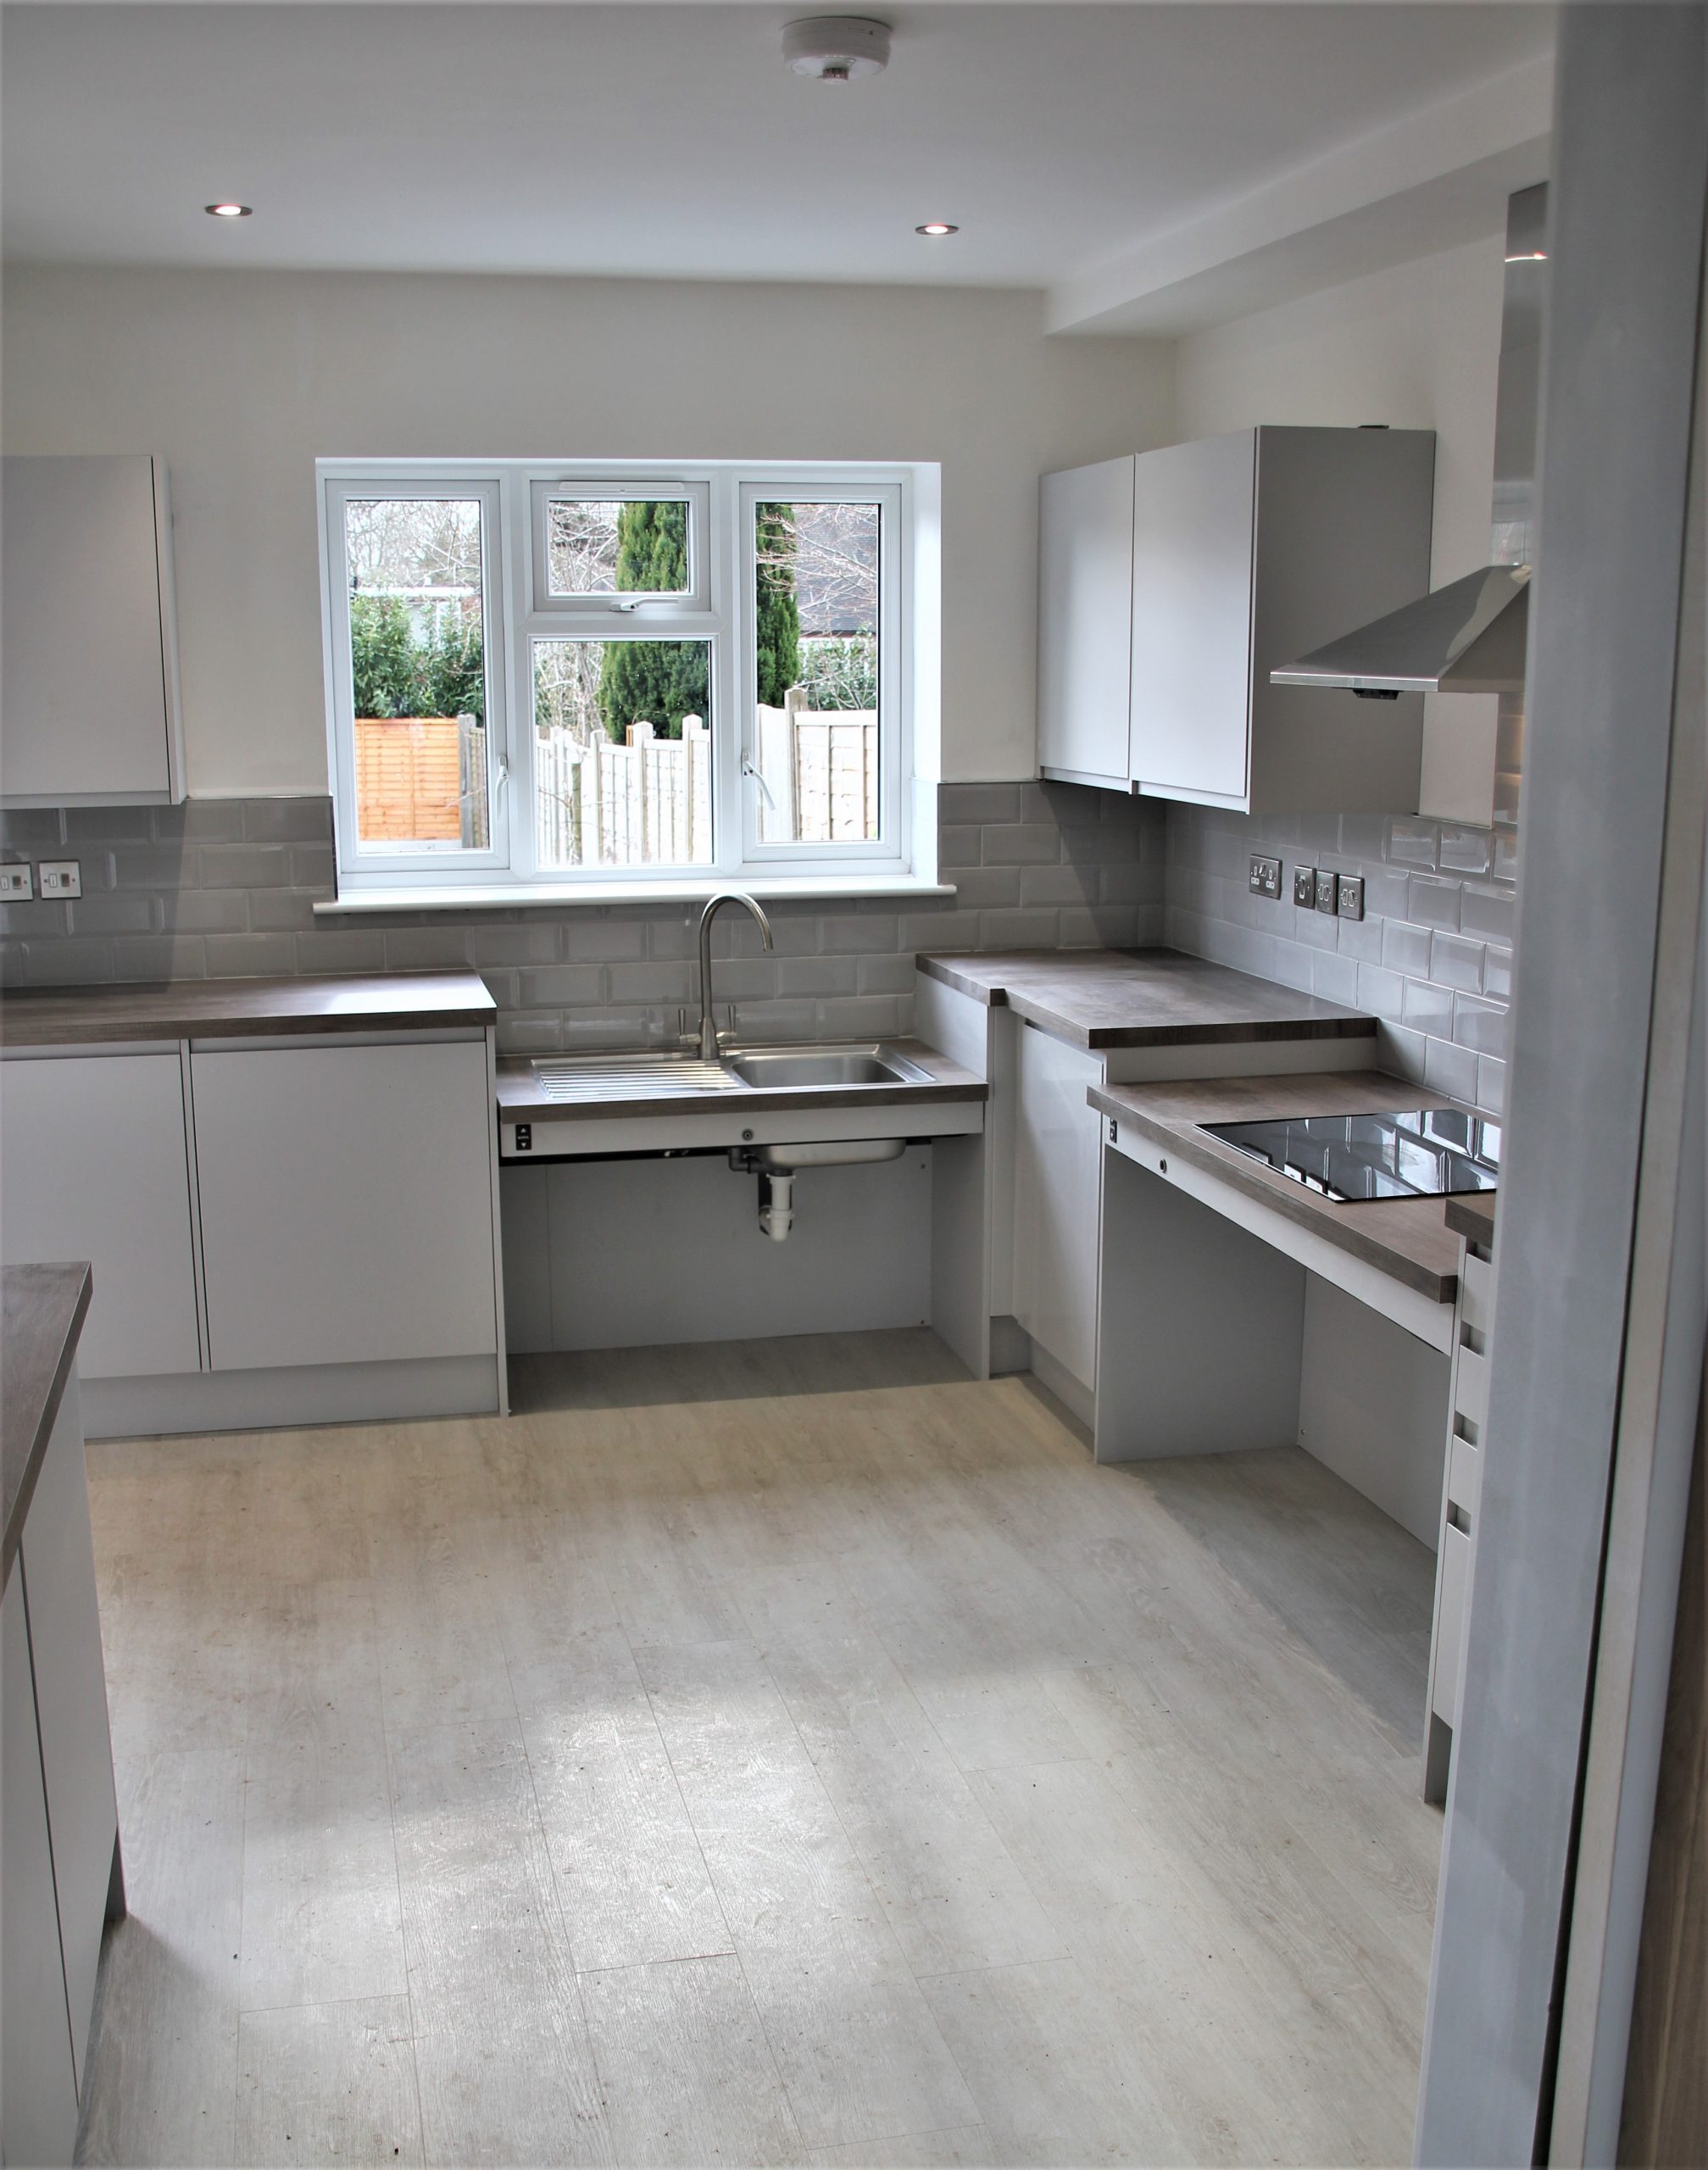 MAGNET CKS DONATES KITCHEN TO SOLIHULL LOCAL PARALYSED IN LIFE-CHANGING ACCIDENT @MagnetUK